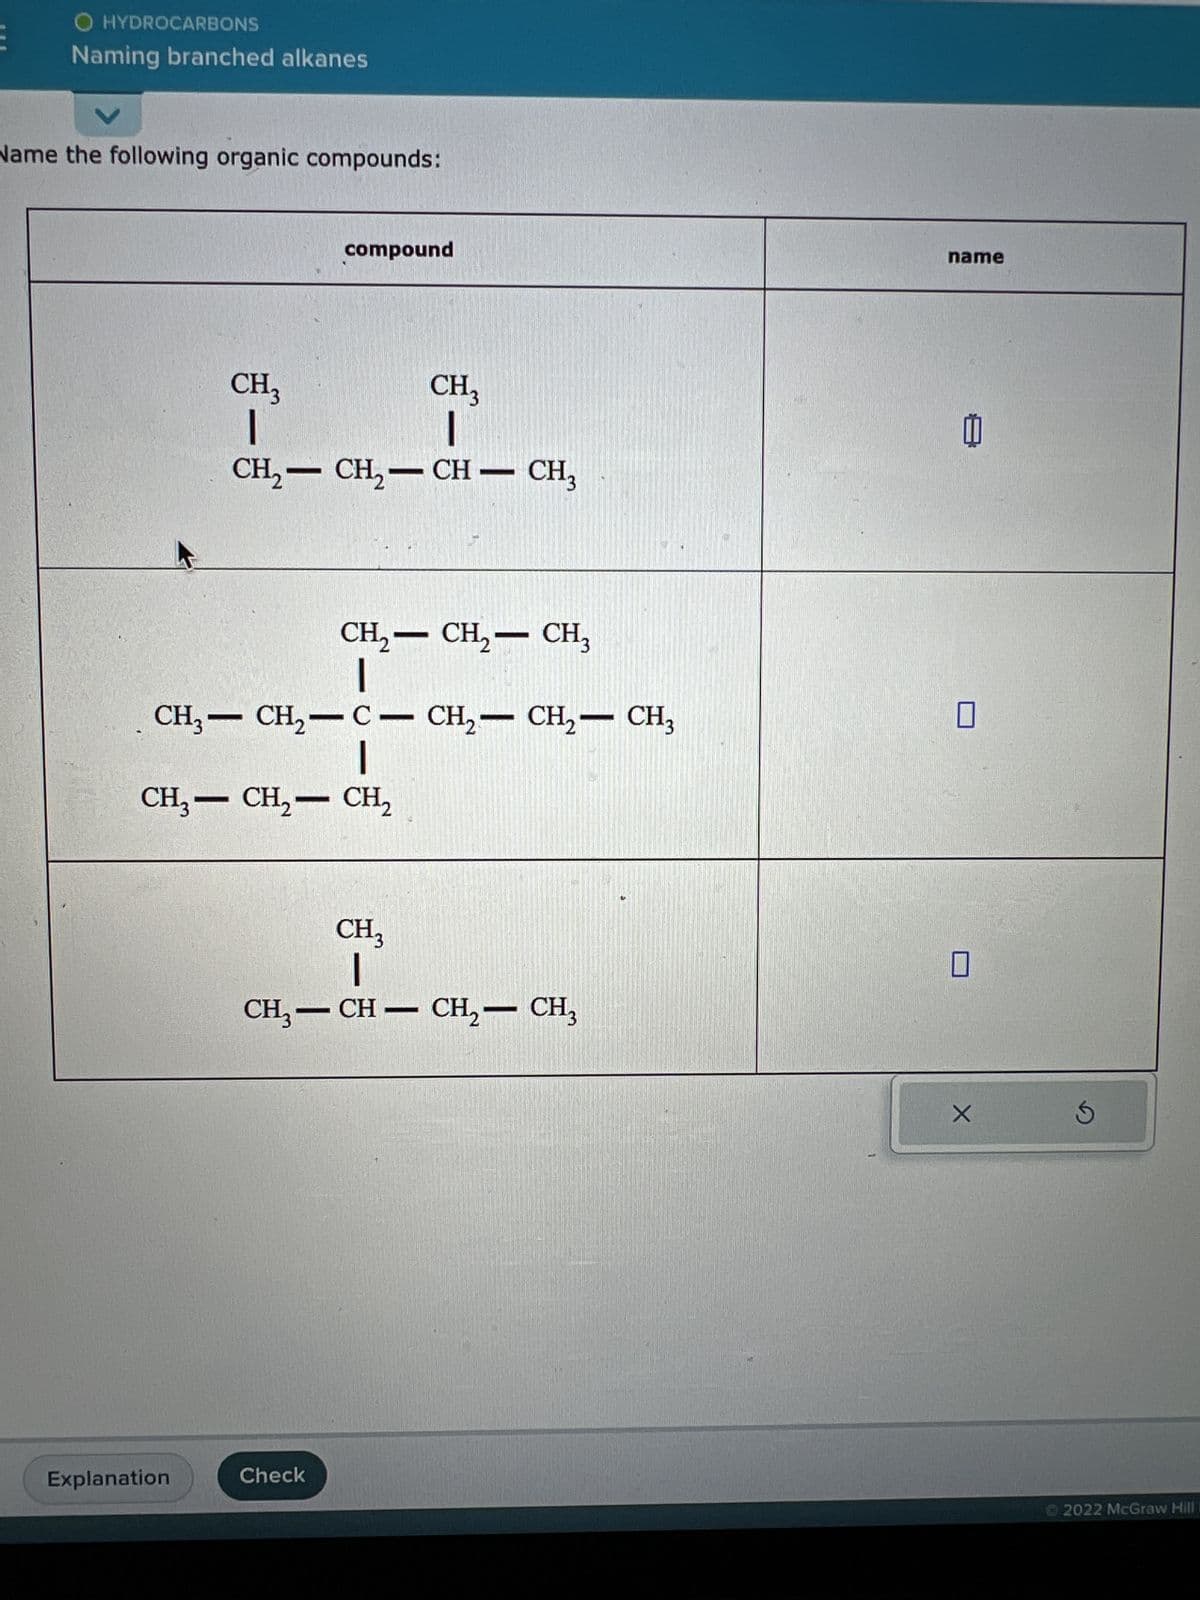 O HYDROCARBONS
Naming branched alkanes
Name the following organic compounds:
CH3
|
Explanation
compound
CH3
I
CH₂-CH₂-CH-CH₂
CH₂ - CH₂ - CH3
|
CH3-CH₂-C- CH₂ - CH₂ - CH3
|
CH3 - CH₂ - CH₂
Check
CH3
—
CH₂-CH-CH₂ - CH₂
name
I
0
X
Ś
Ⓒ2022 McGraw Hill